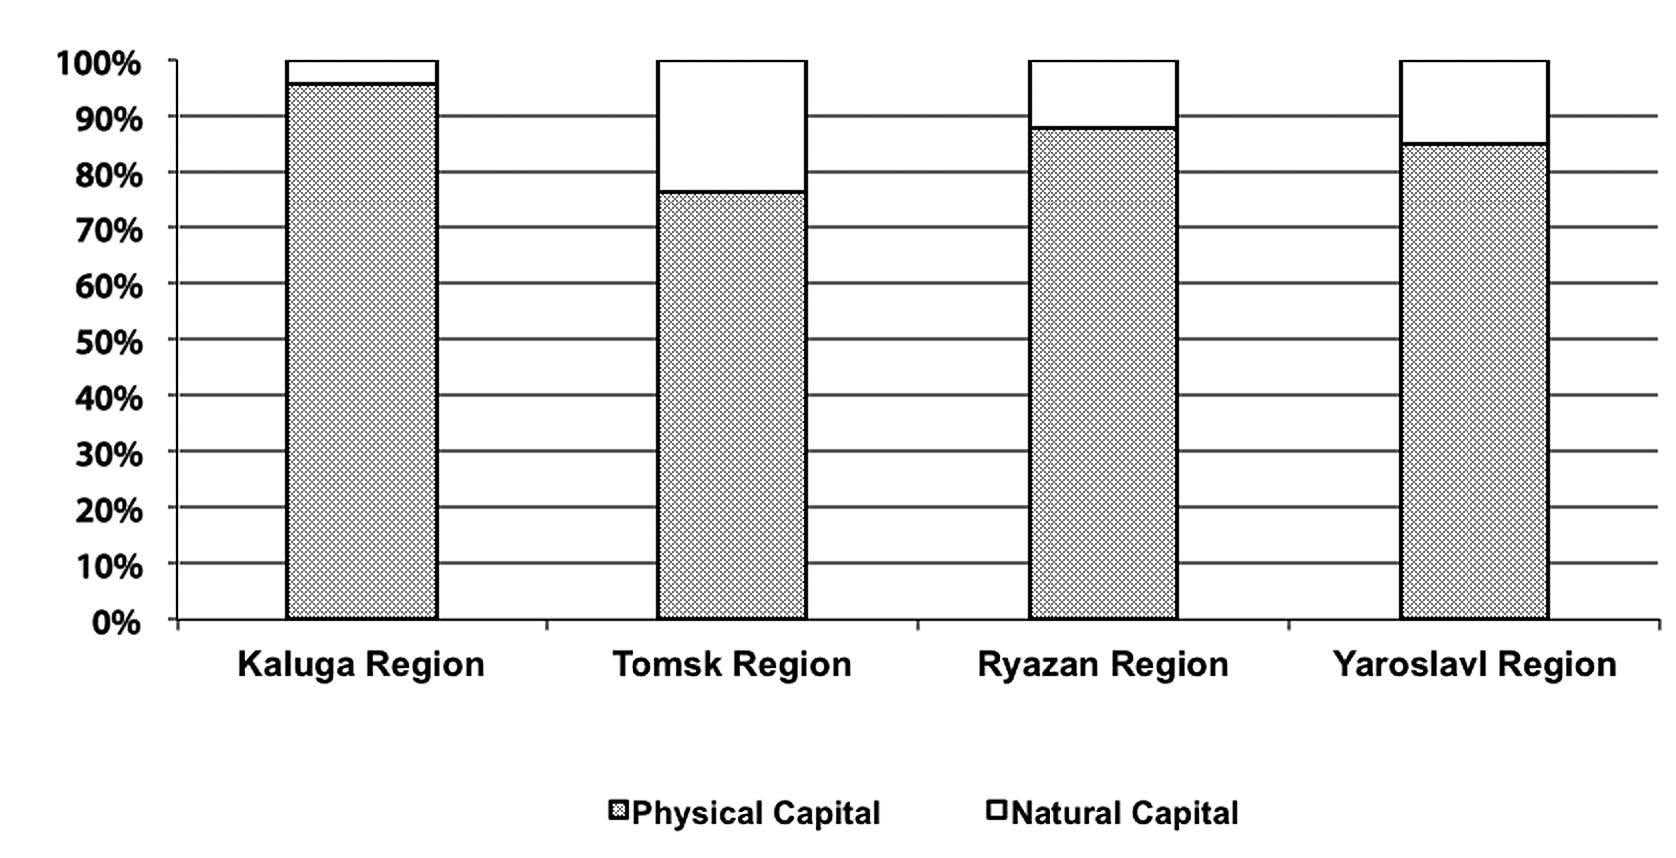 Shares of natural and physical capital in different Russian regions in 1996.